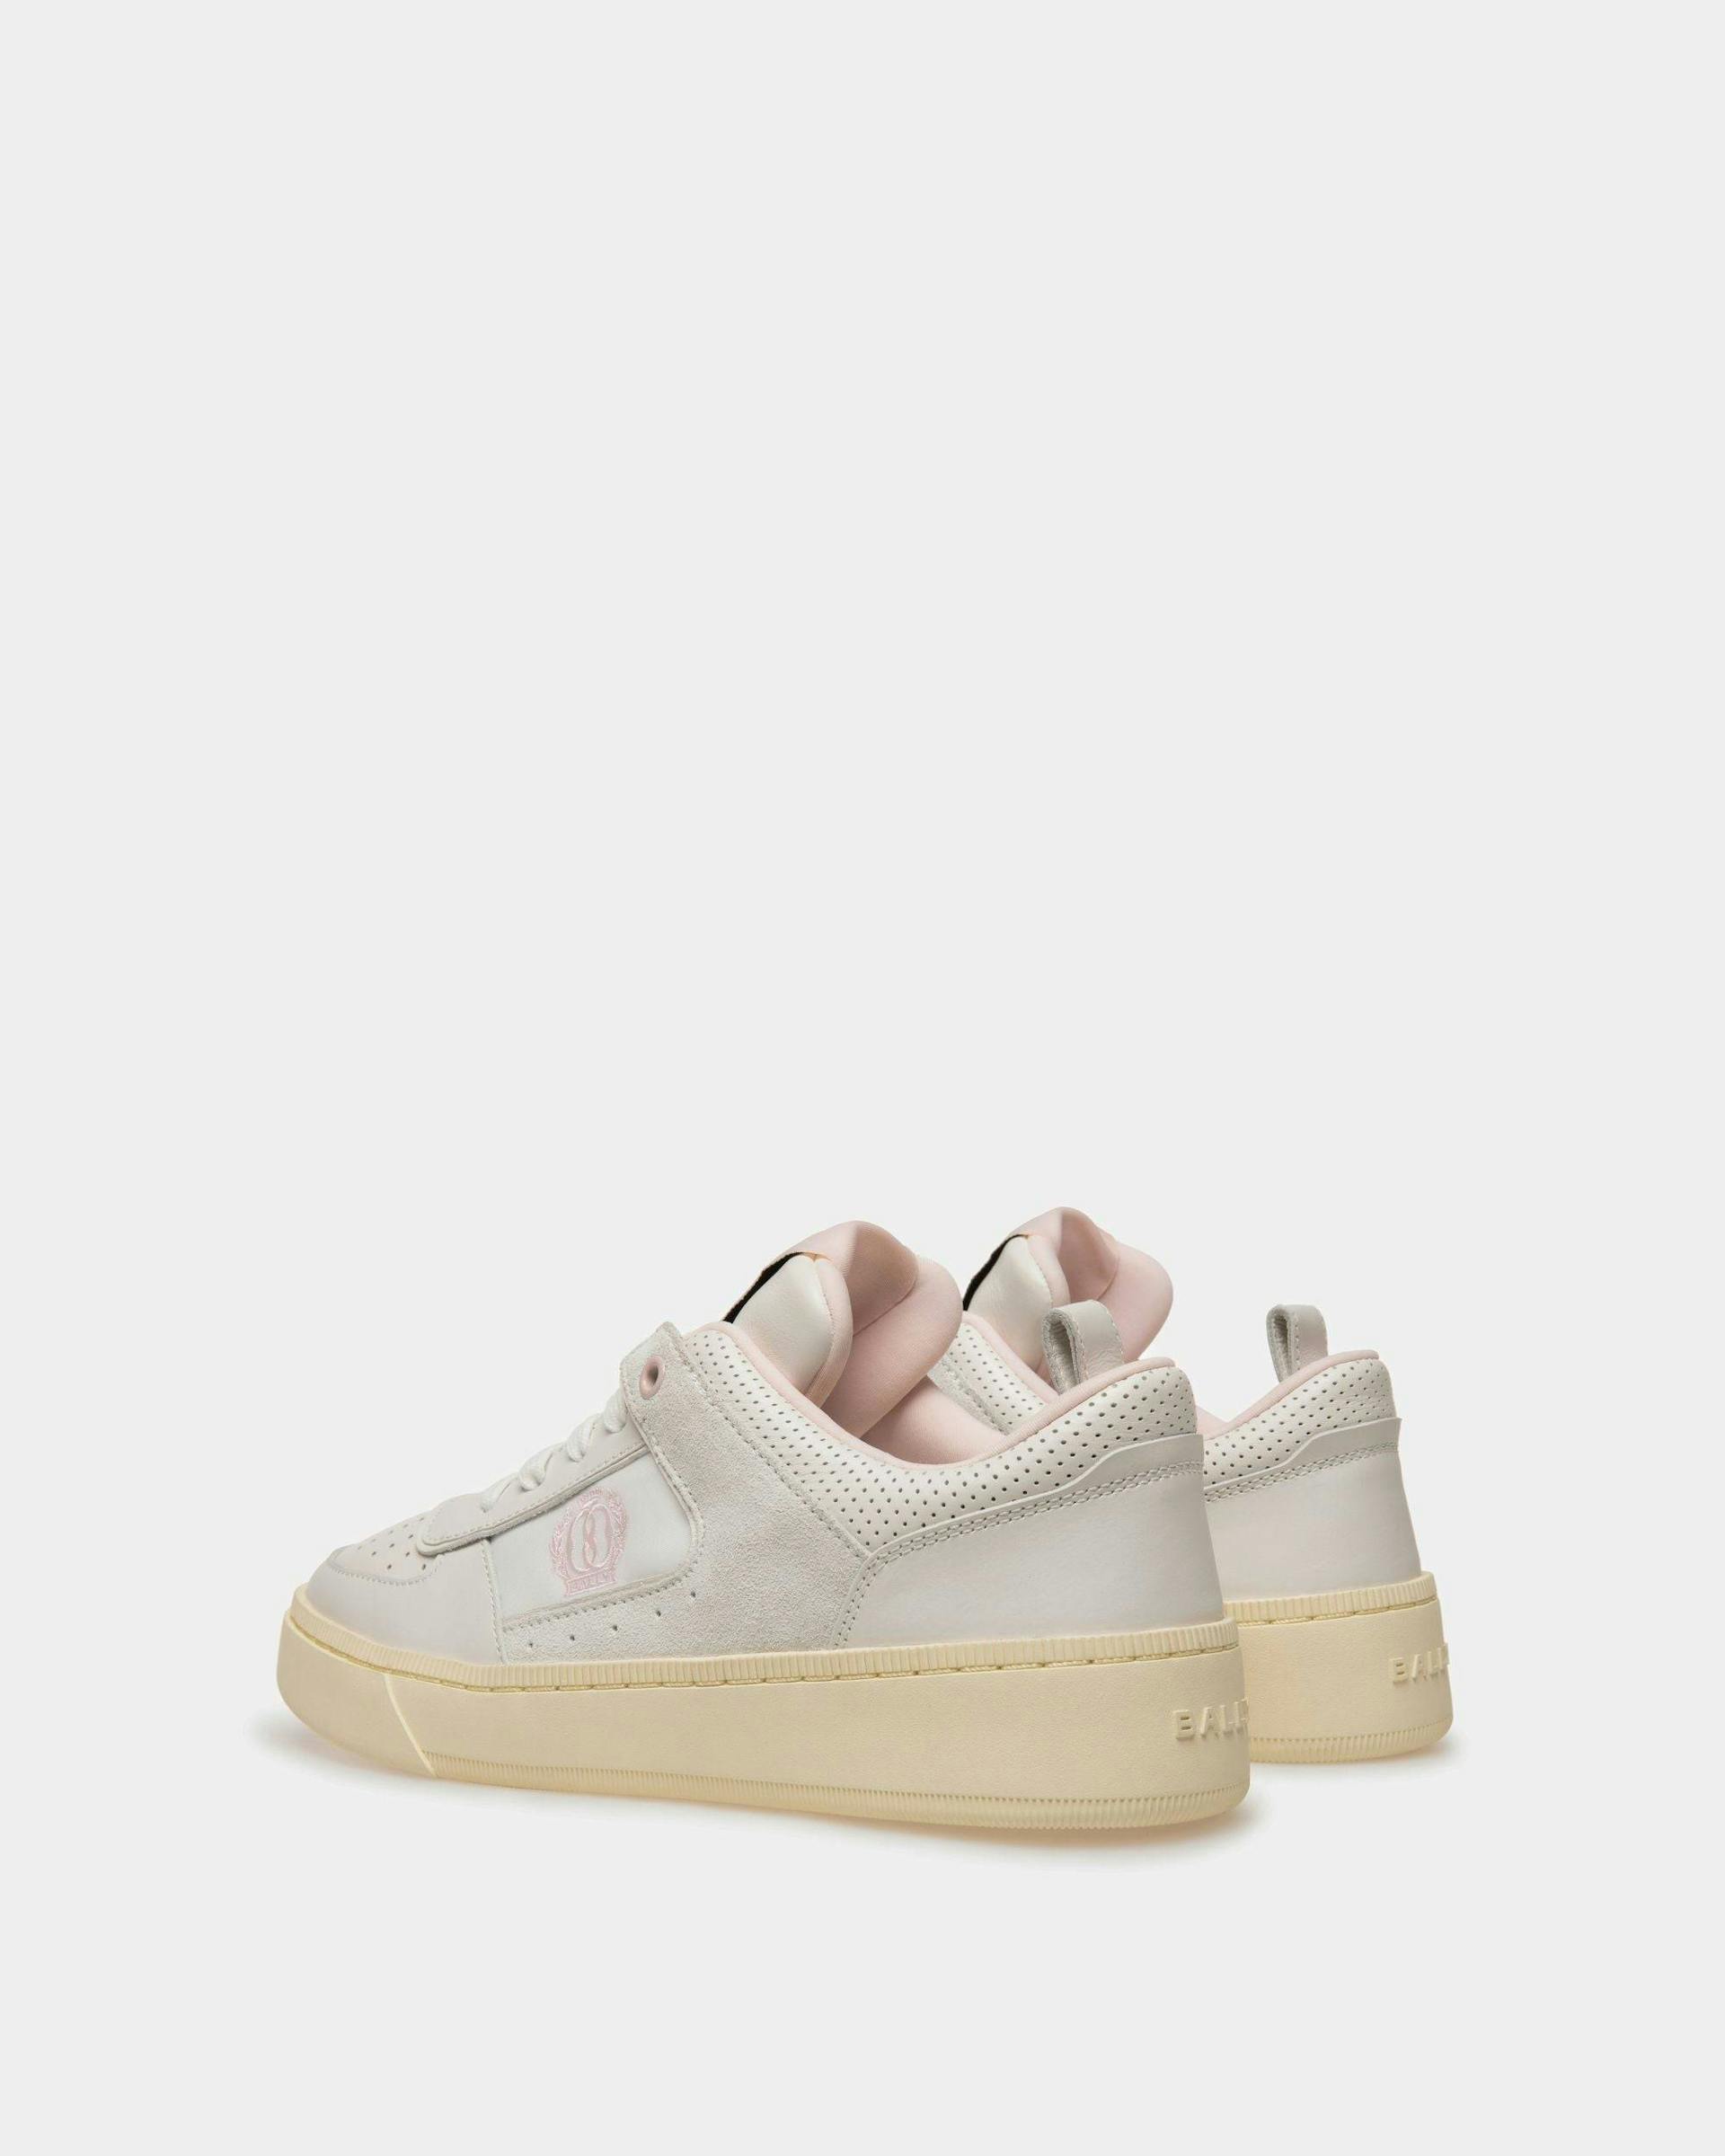 Raise Sneakers In White And Rosa Leather - Women's - Bally - 03